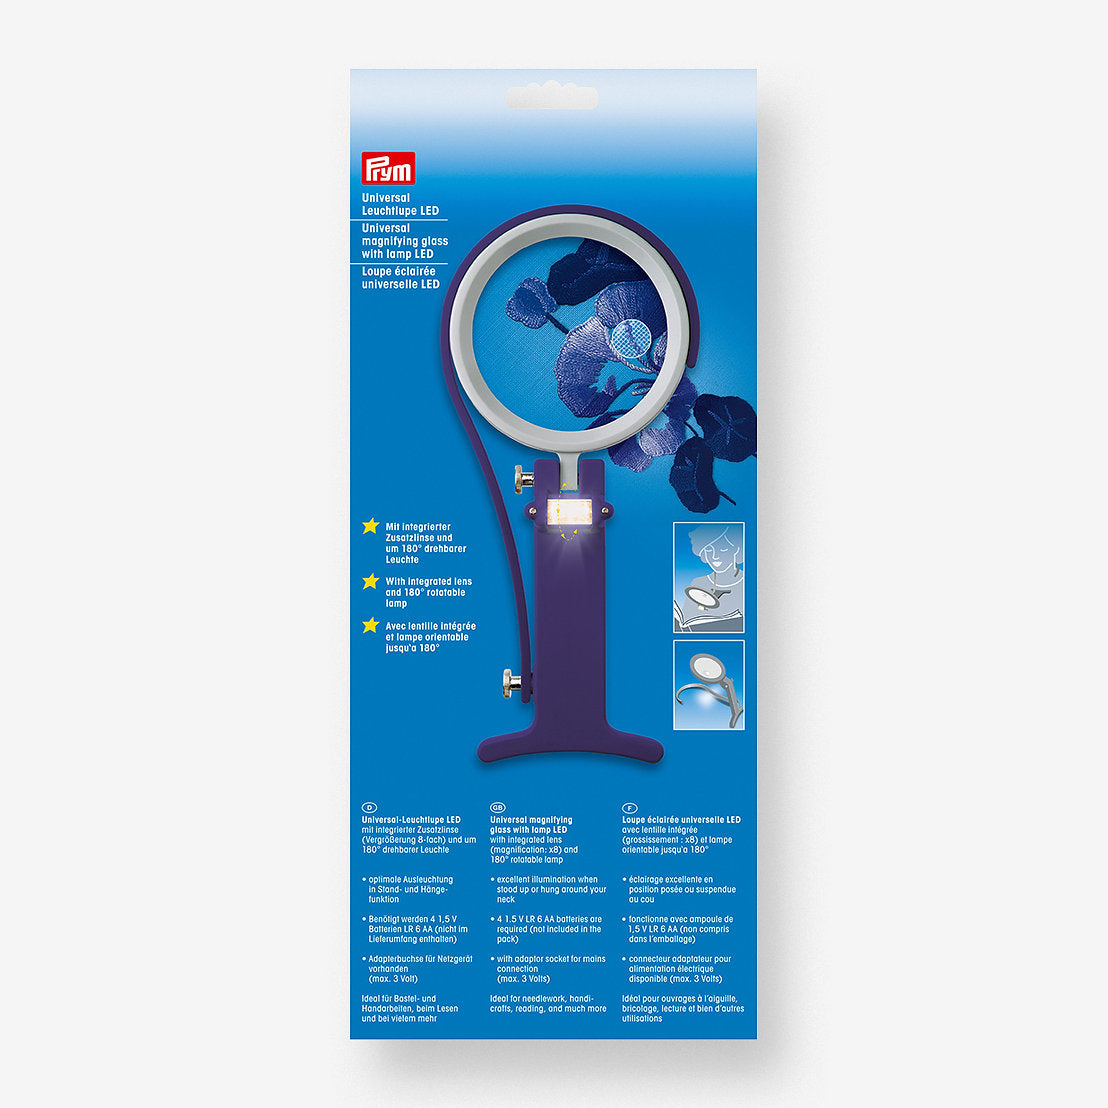 Hands-free LED universal magnifying glass 610380